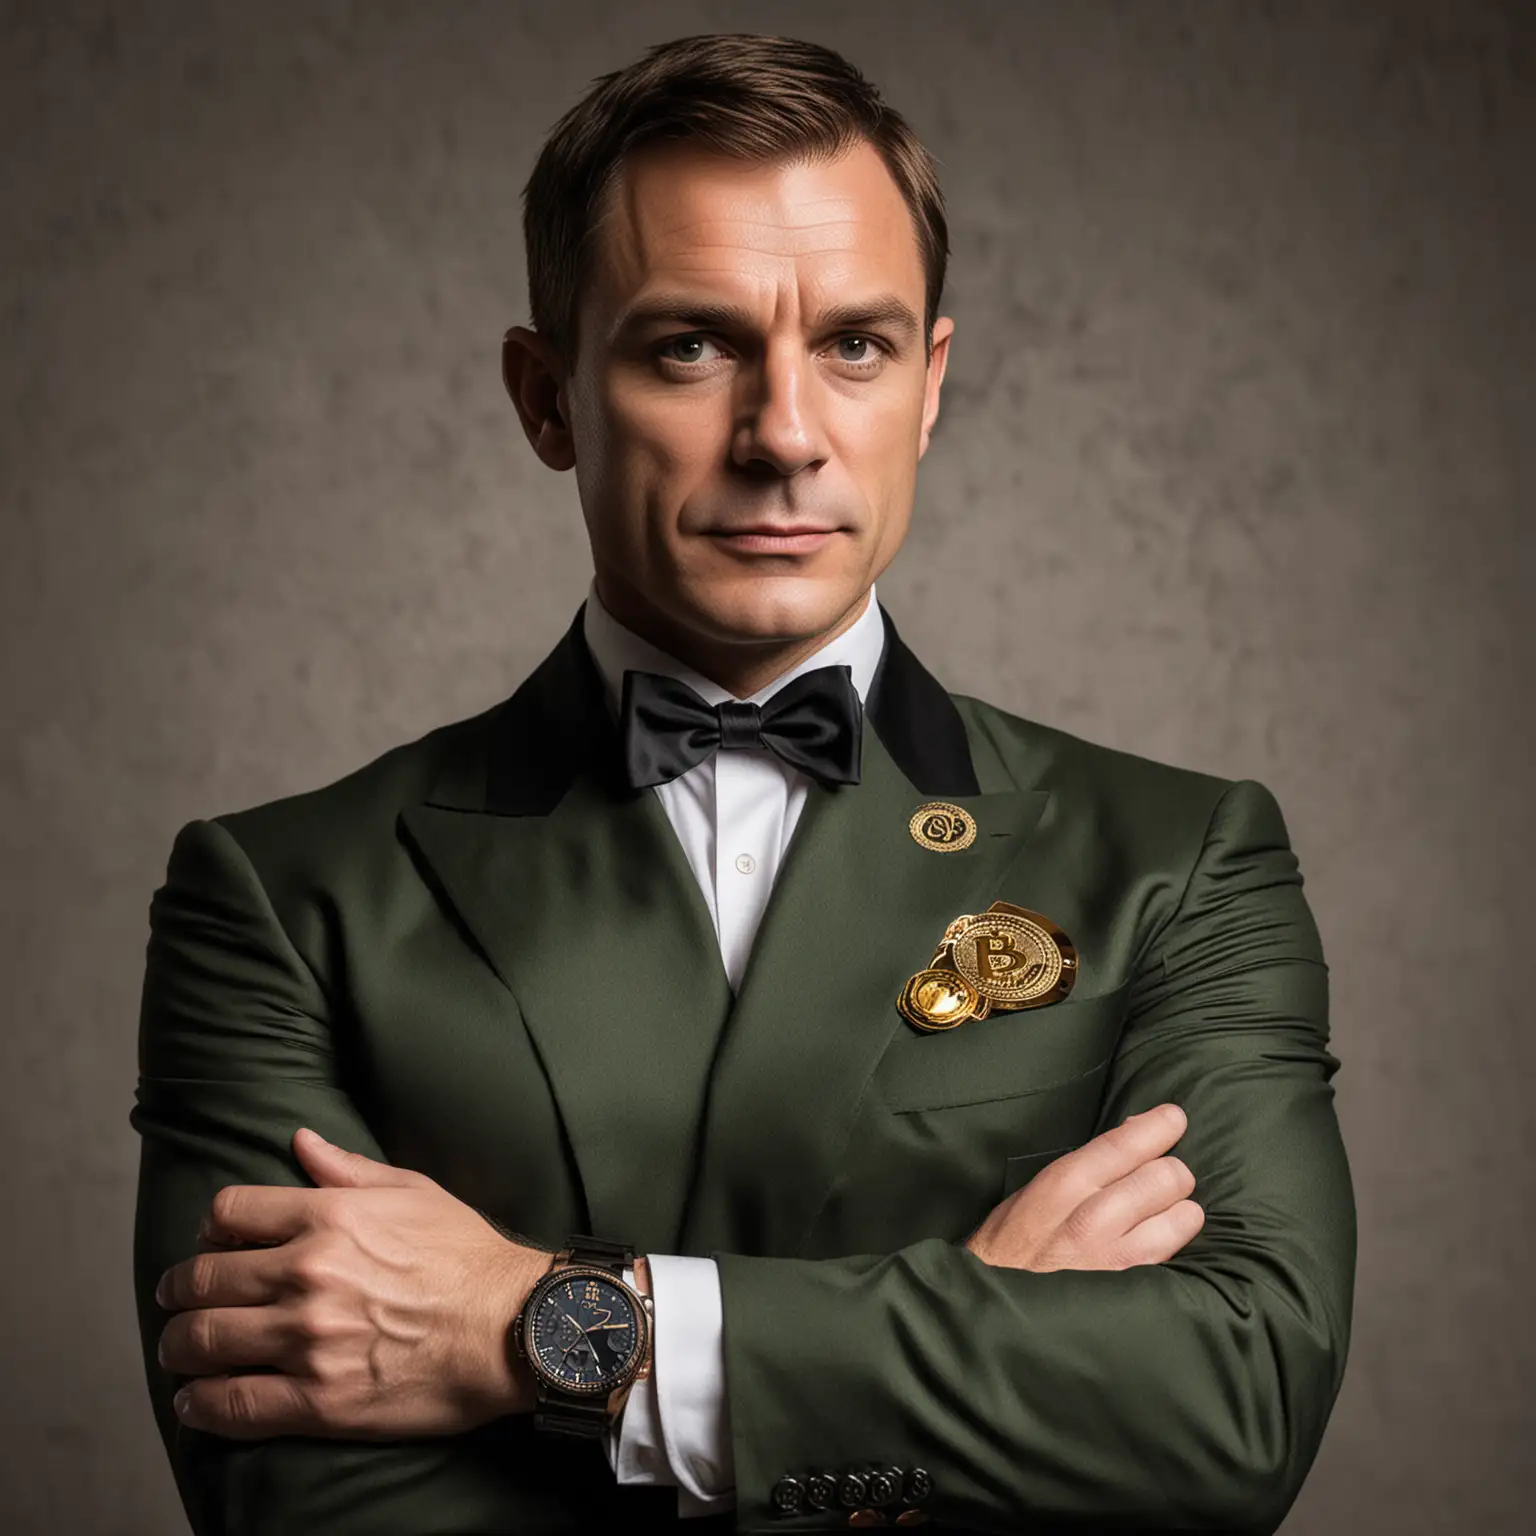 A person called Bitcoin Bond, just like James Bond 007, with a military-looking theme to it.